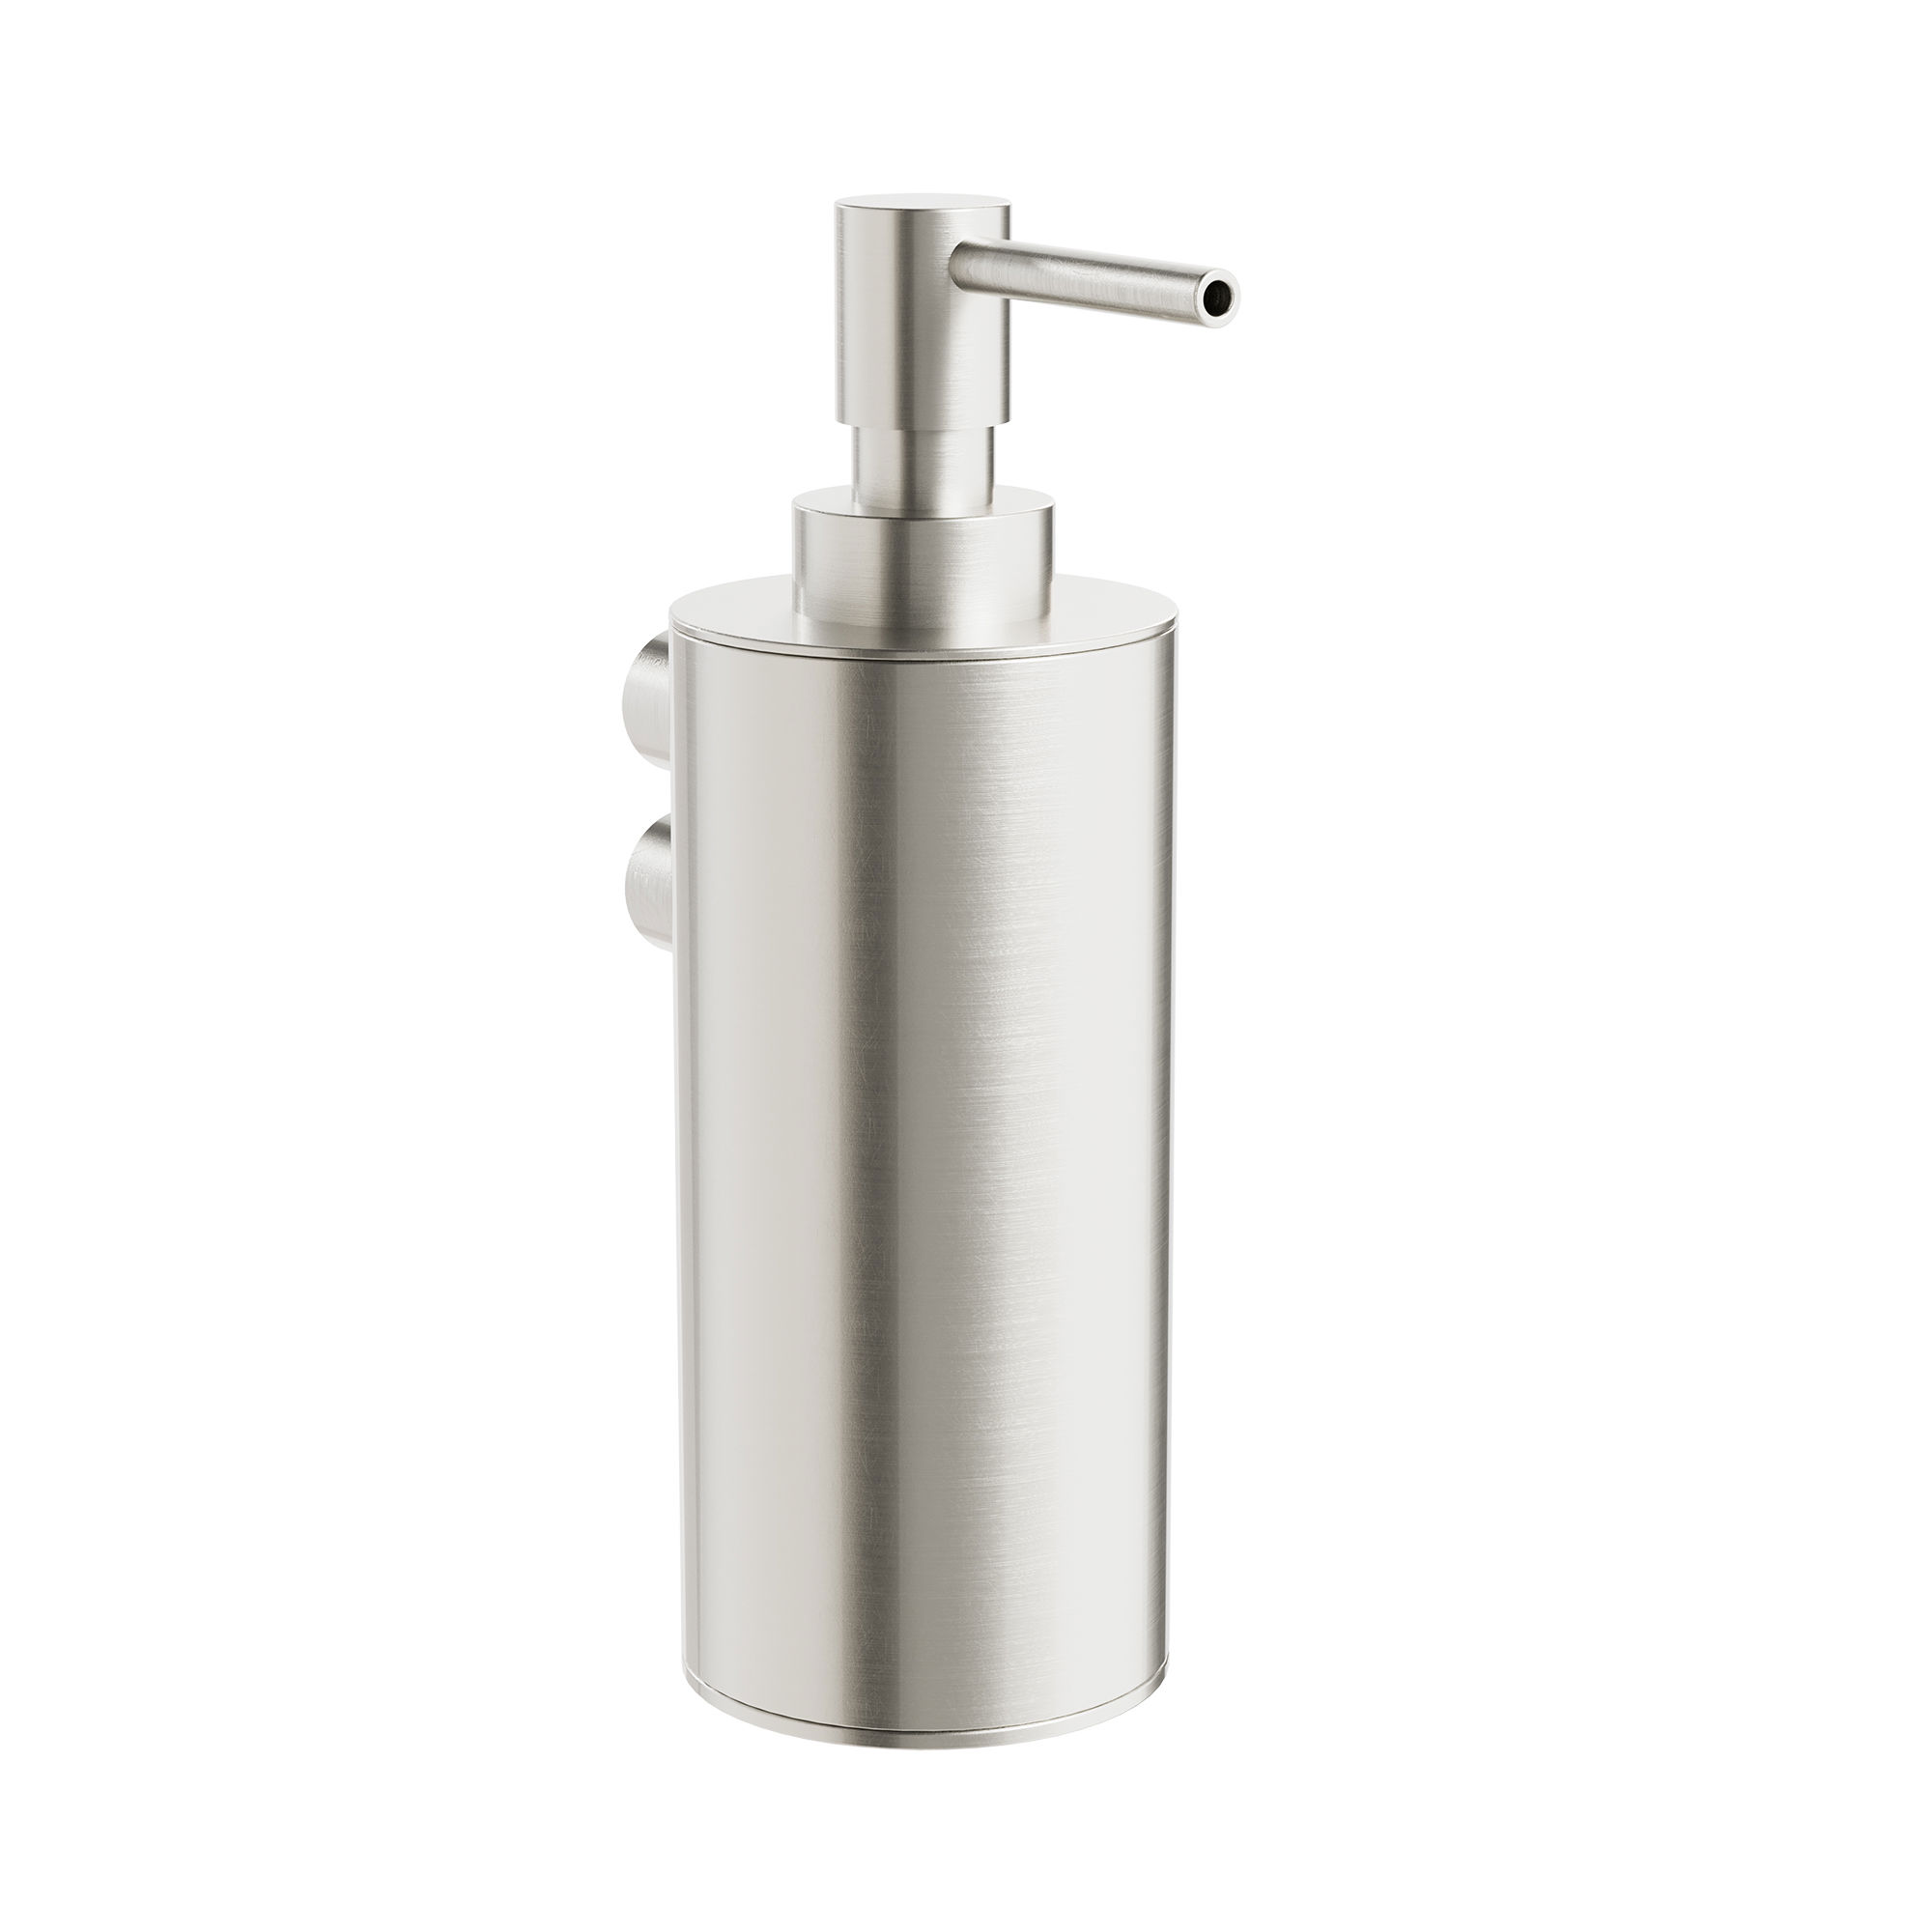 The Lui Wall Mounted Soap Dispenser